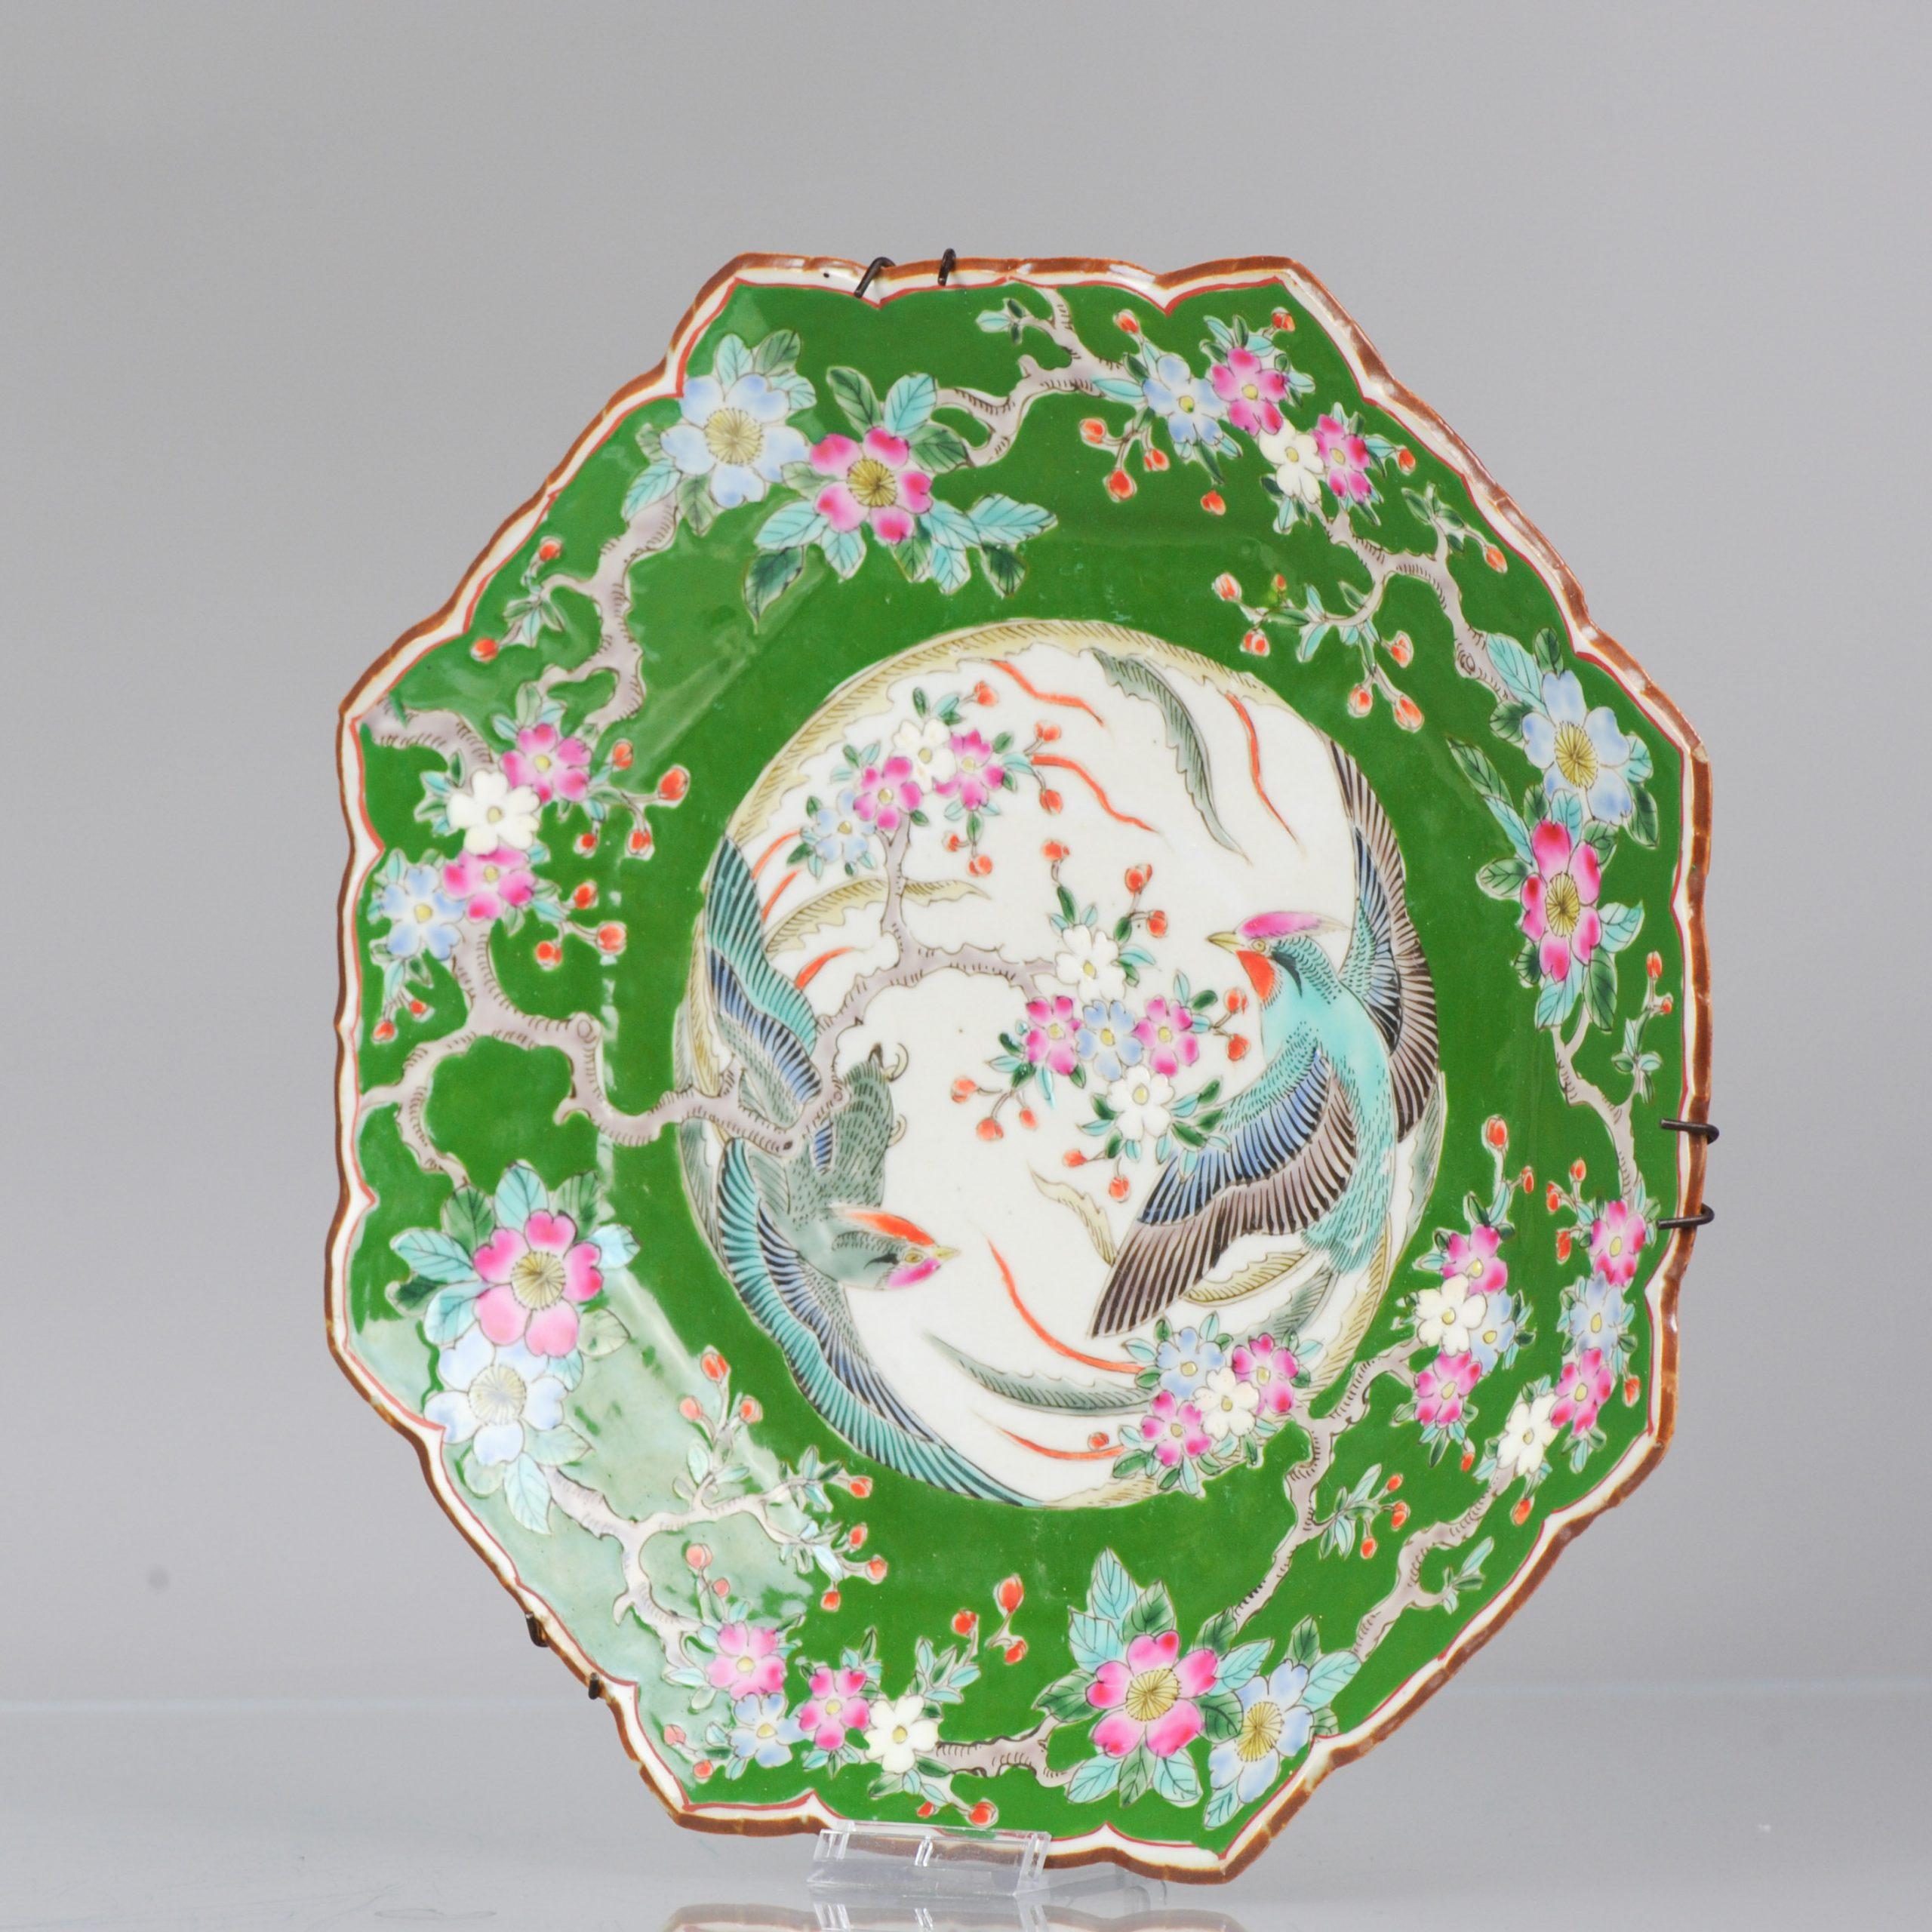 Description
A very nice yamatoku plate.

With a colorfull scene of flowers, and fenghuang

Condition
Overall Condition some small frits/chips to rim only, nothing serious. Size 265x45mm DXH

Period
19th century
20th century.